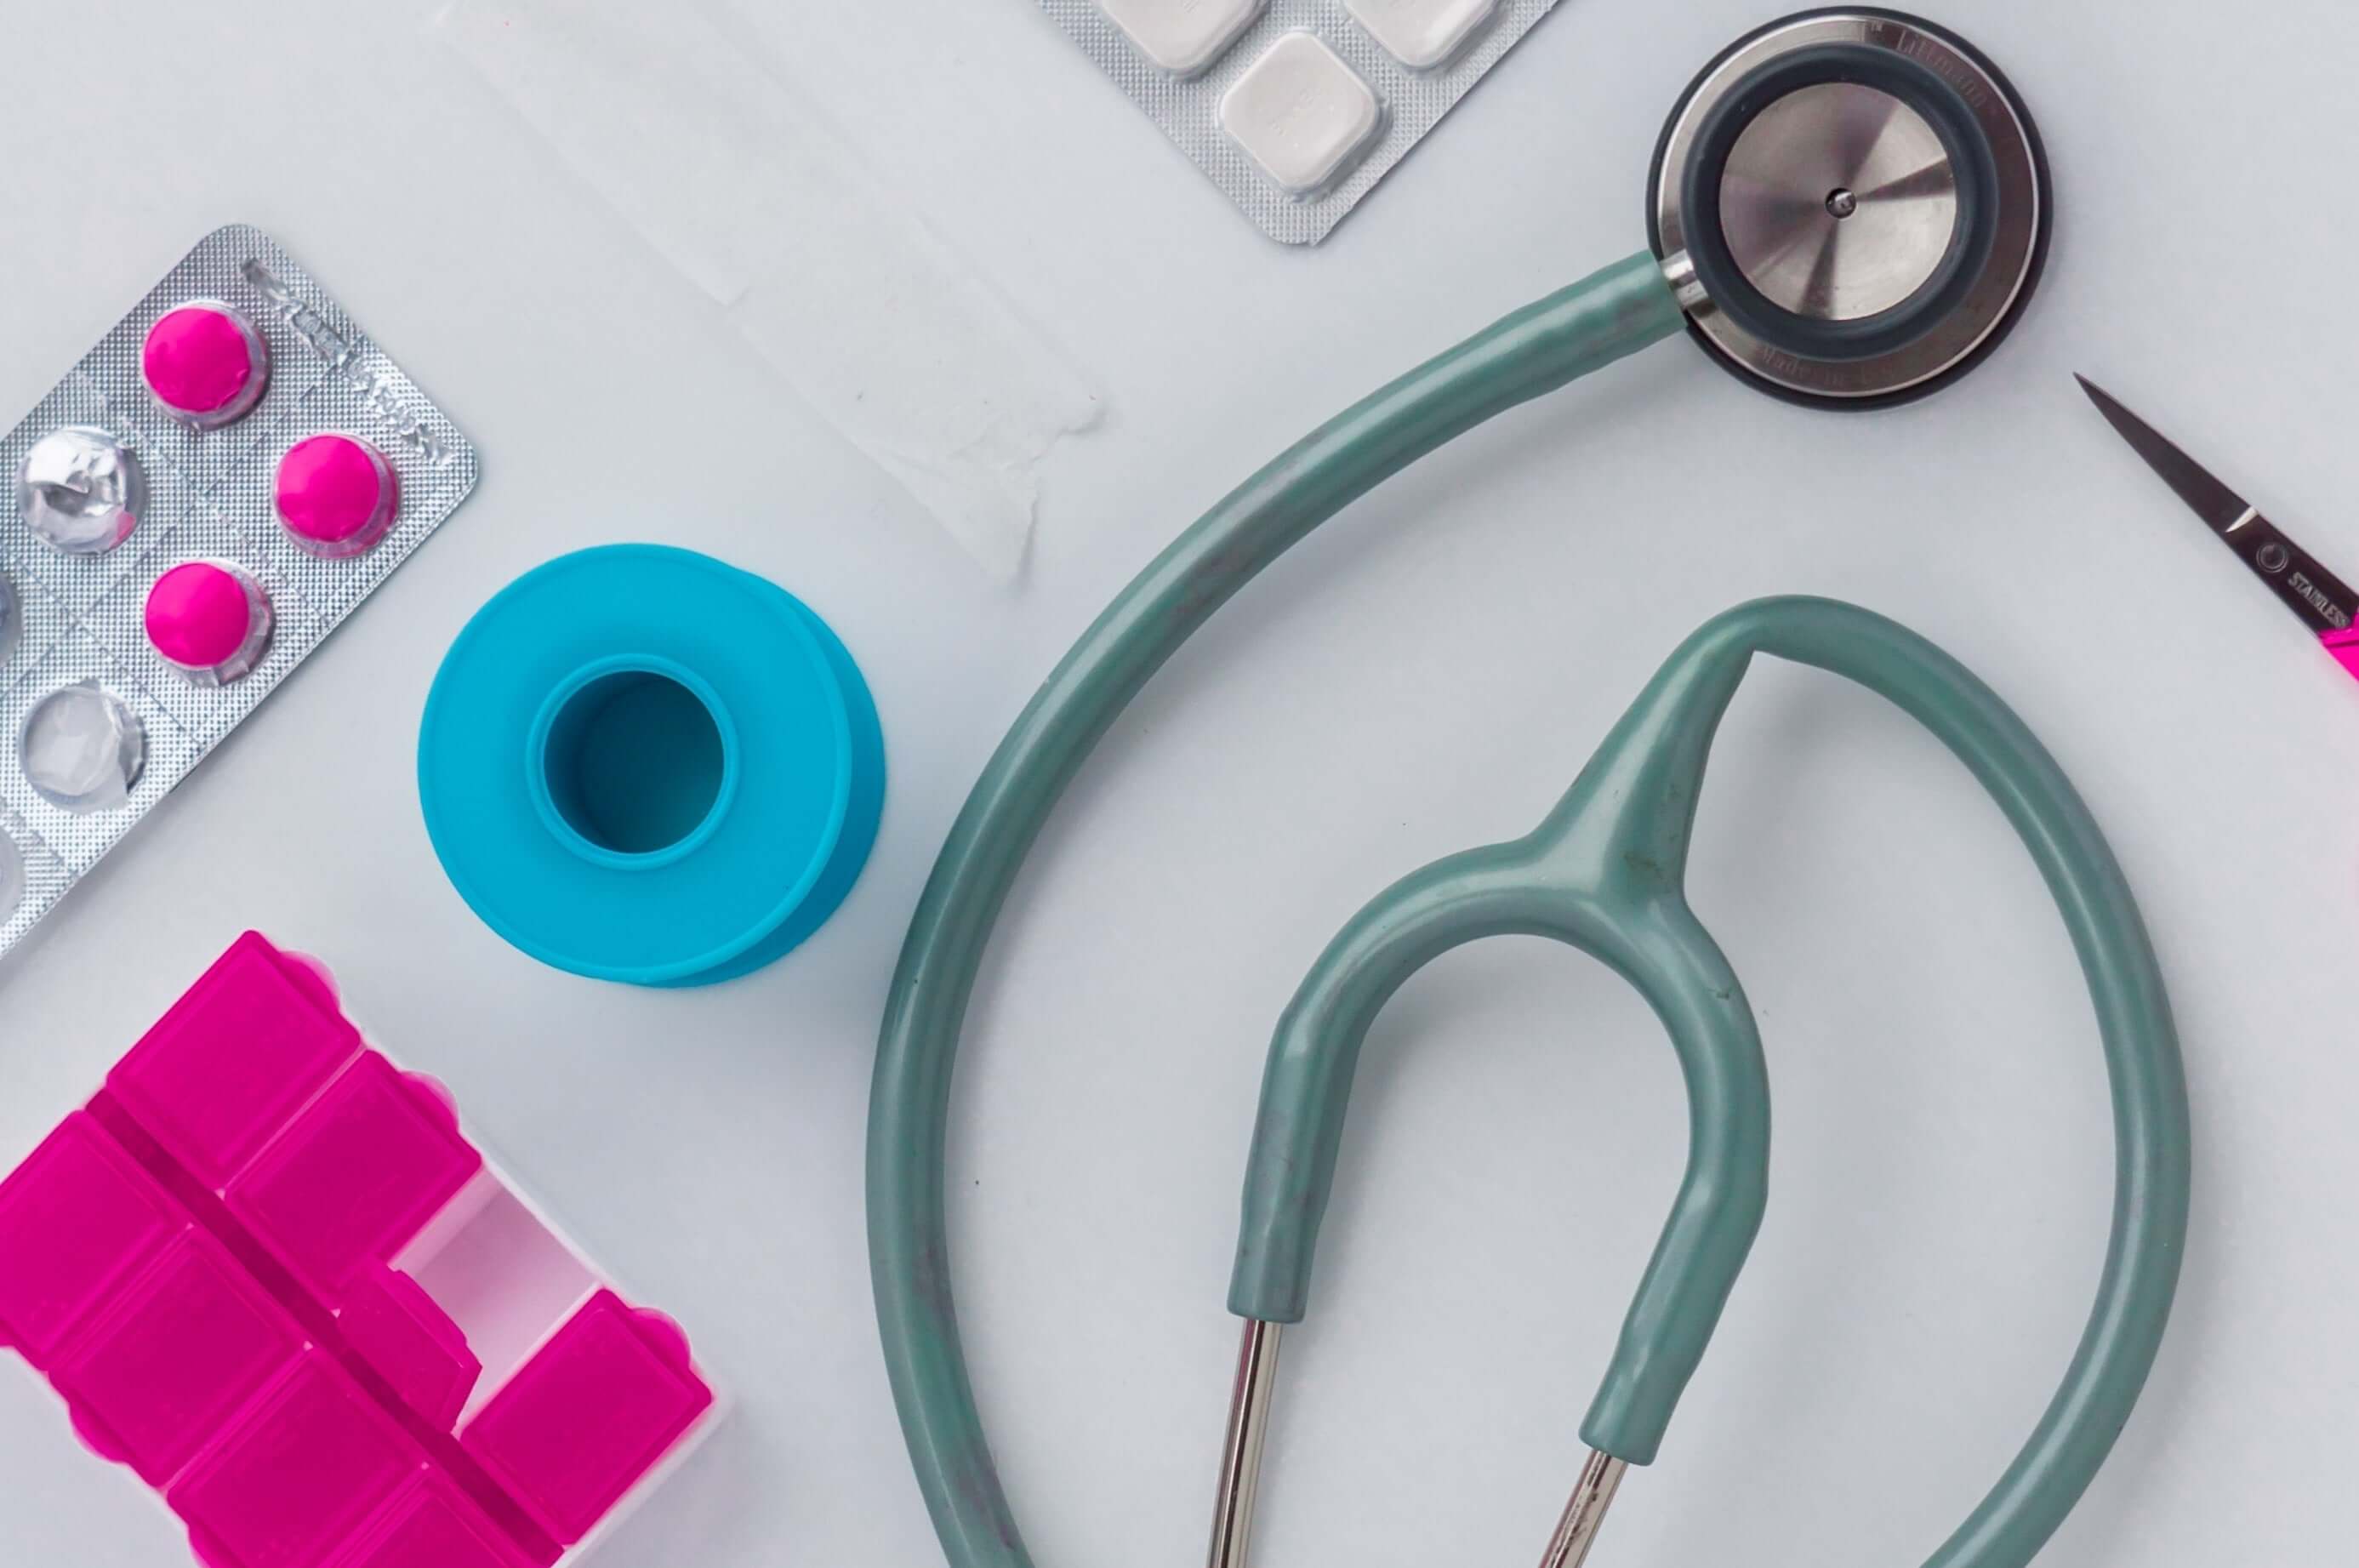 Colorful stethoscope and other hospital goods